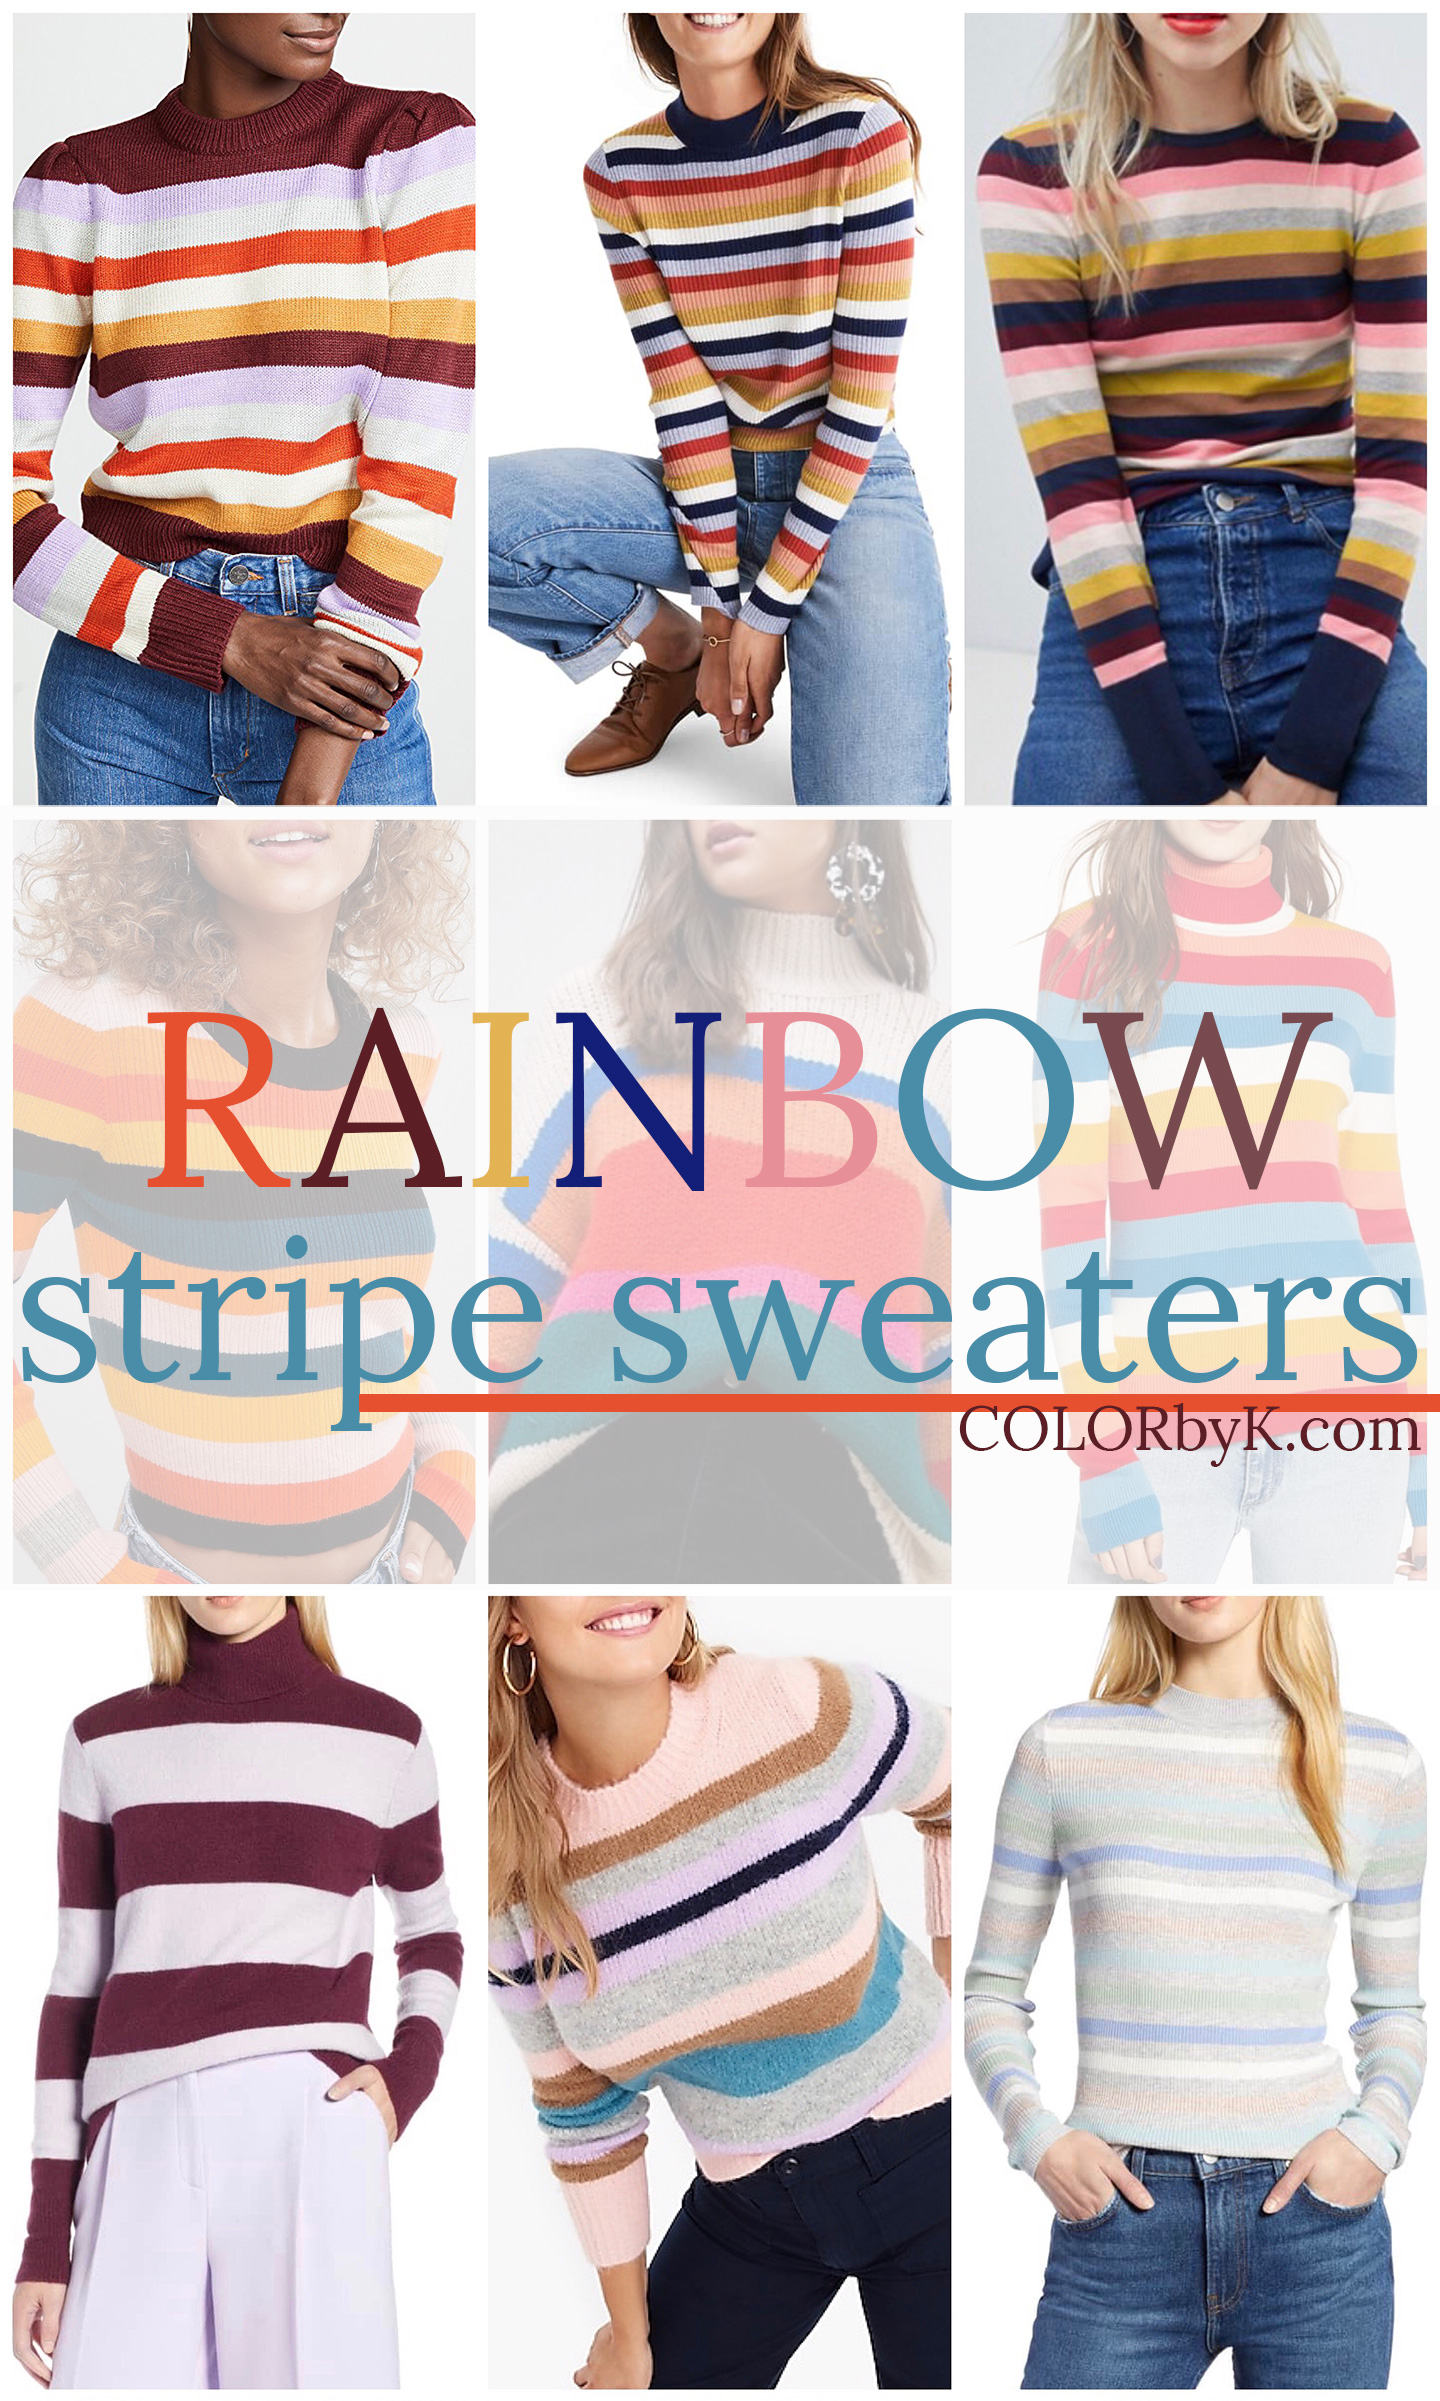 Rainbow Stripe Sweaters for Fall | COLOR by K